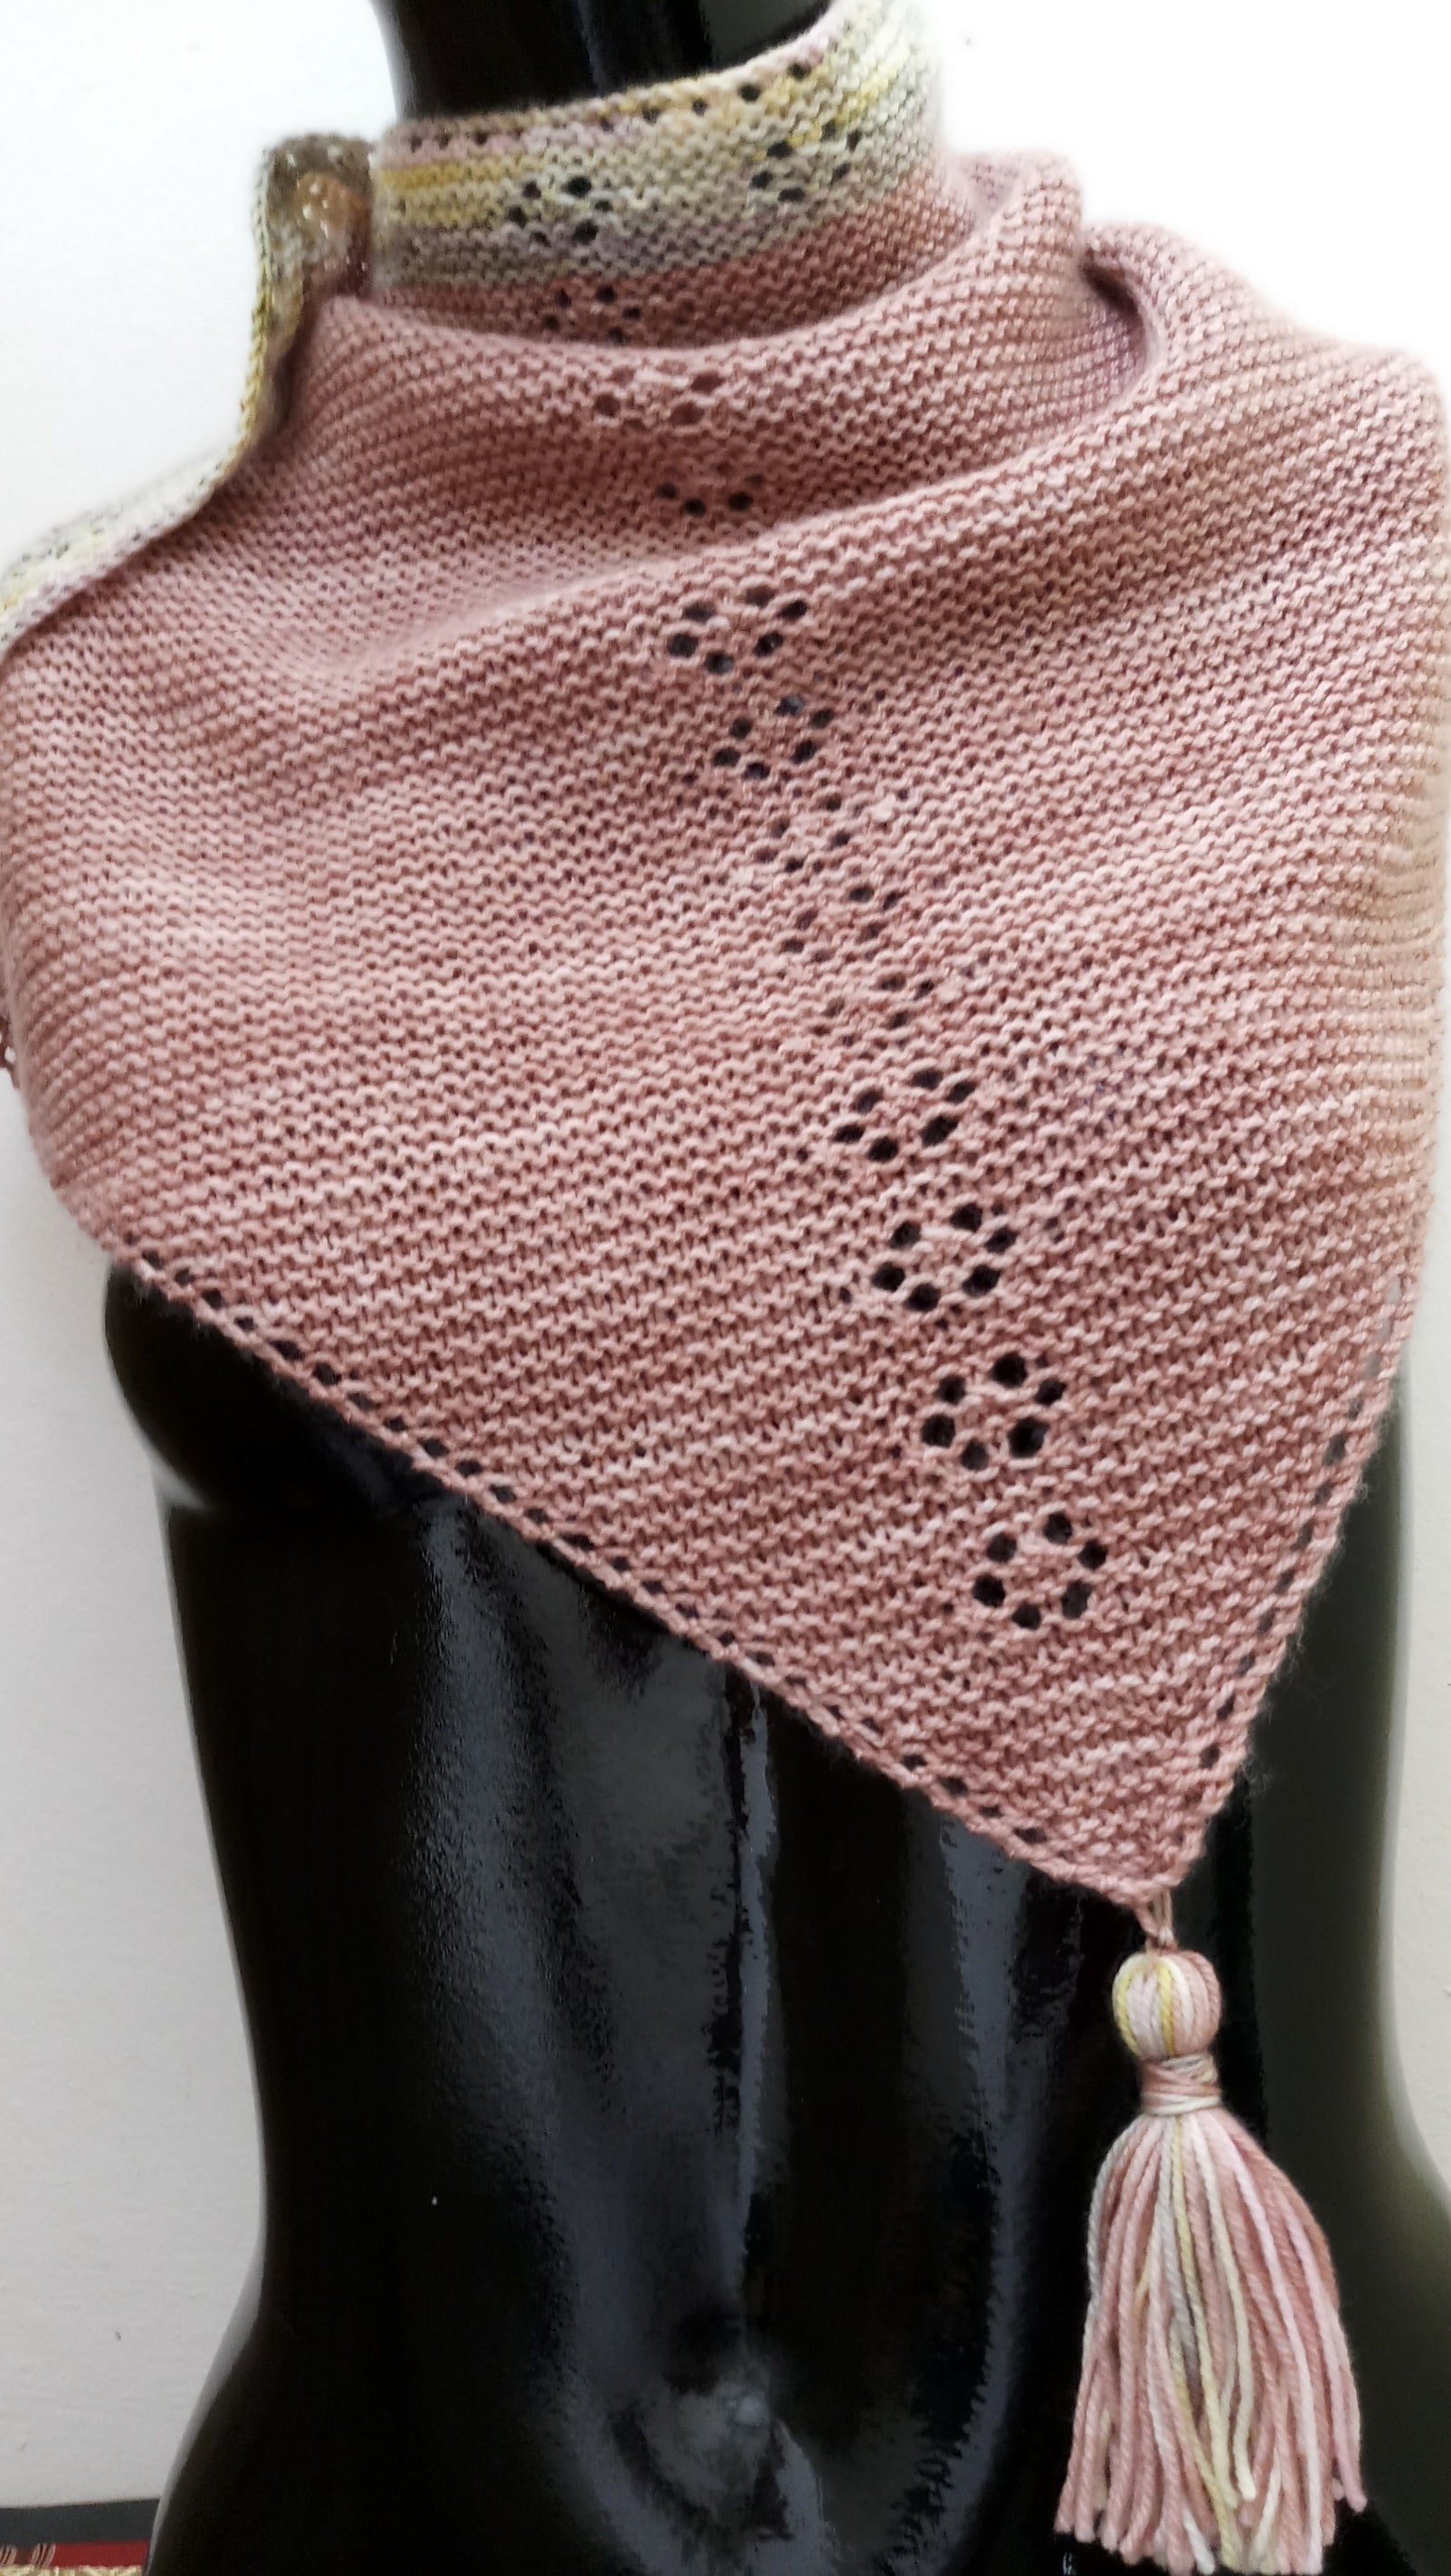 A pink shawl with paw print lace details down the spine